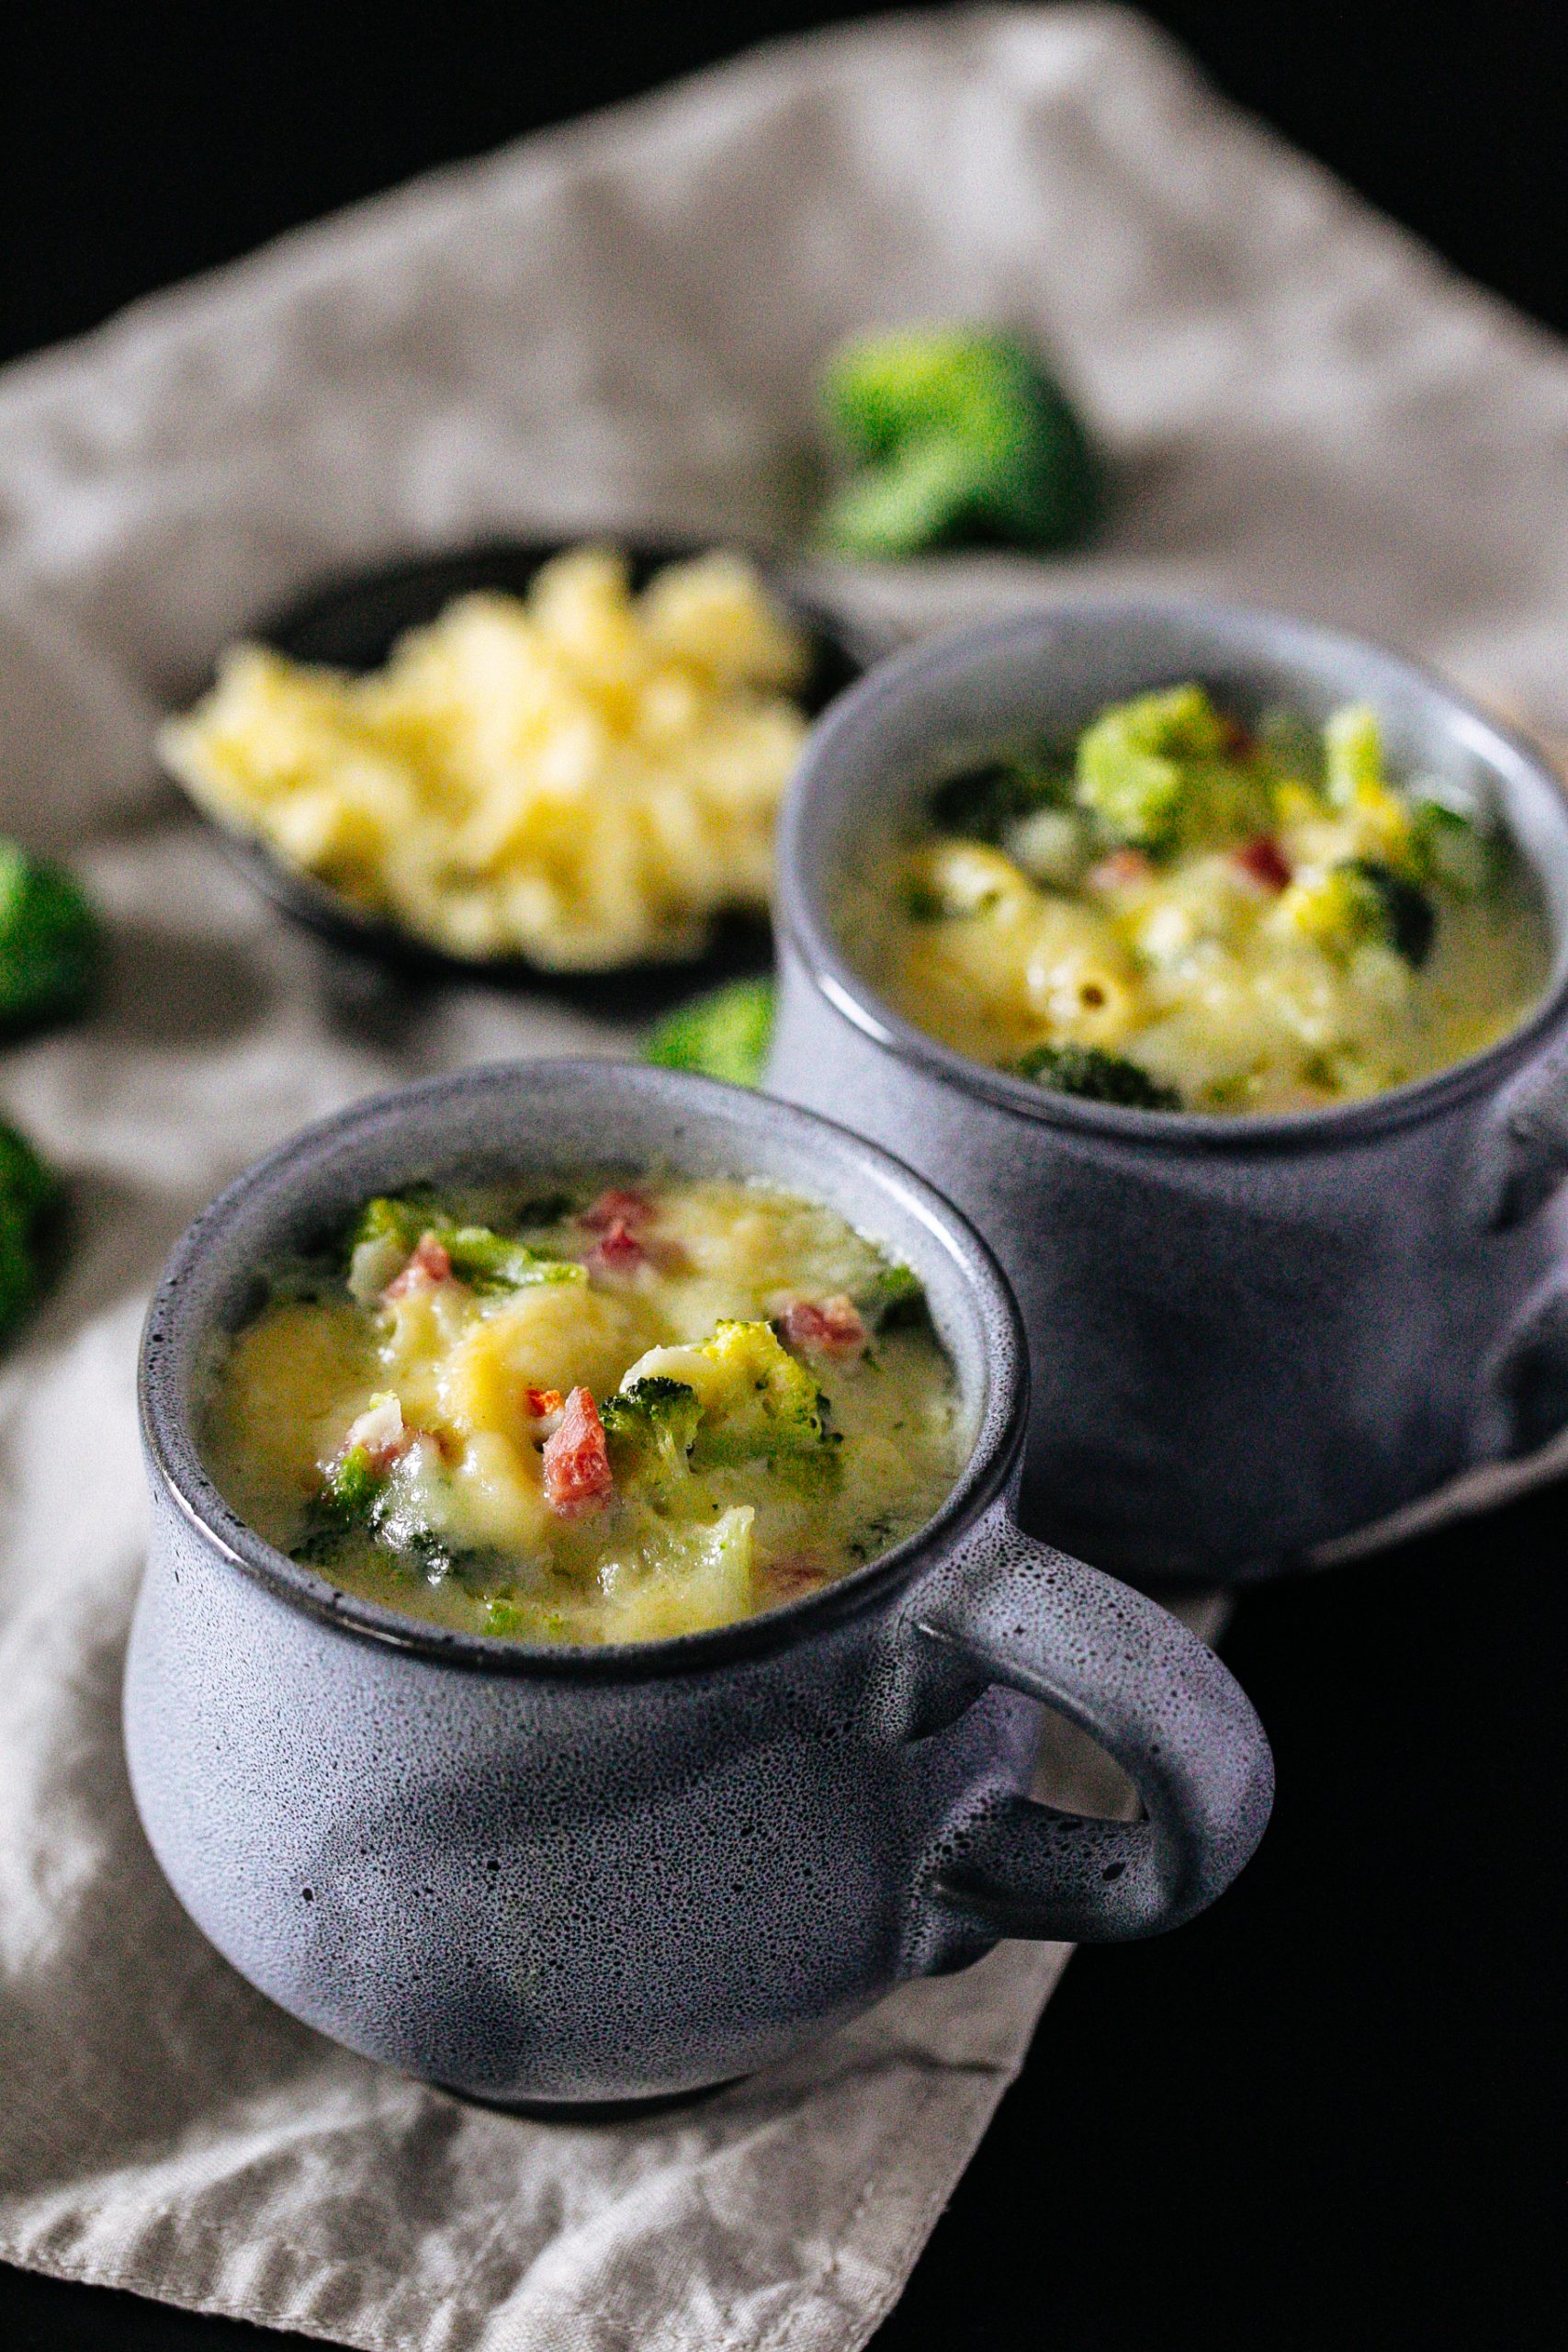 Mac-and-Cheese-Suppe mit und ohne Thermomix®